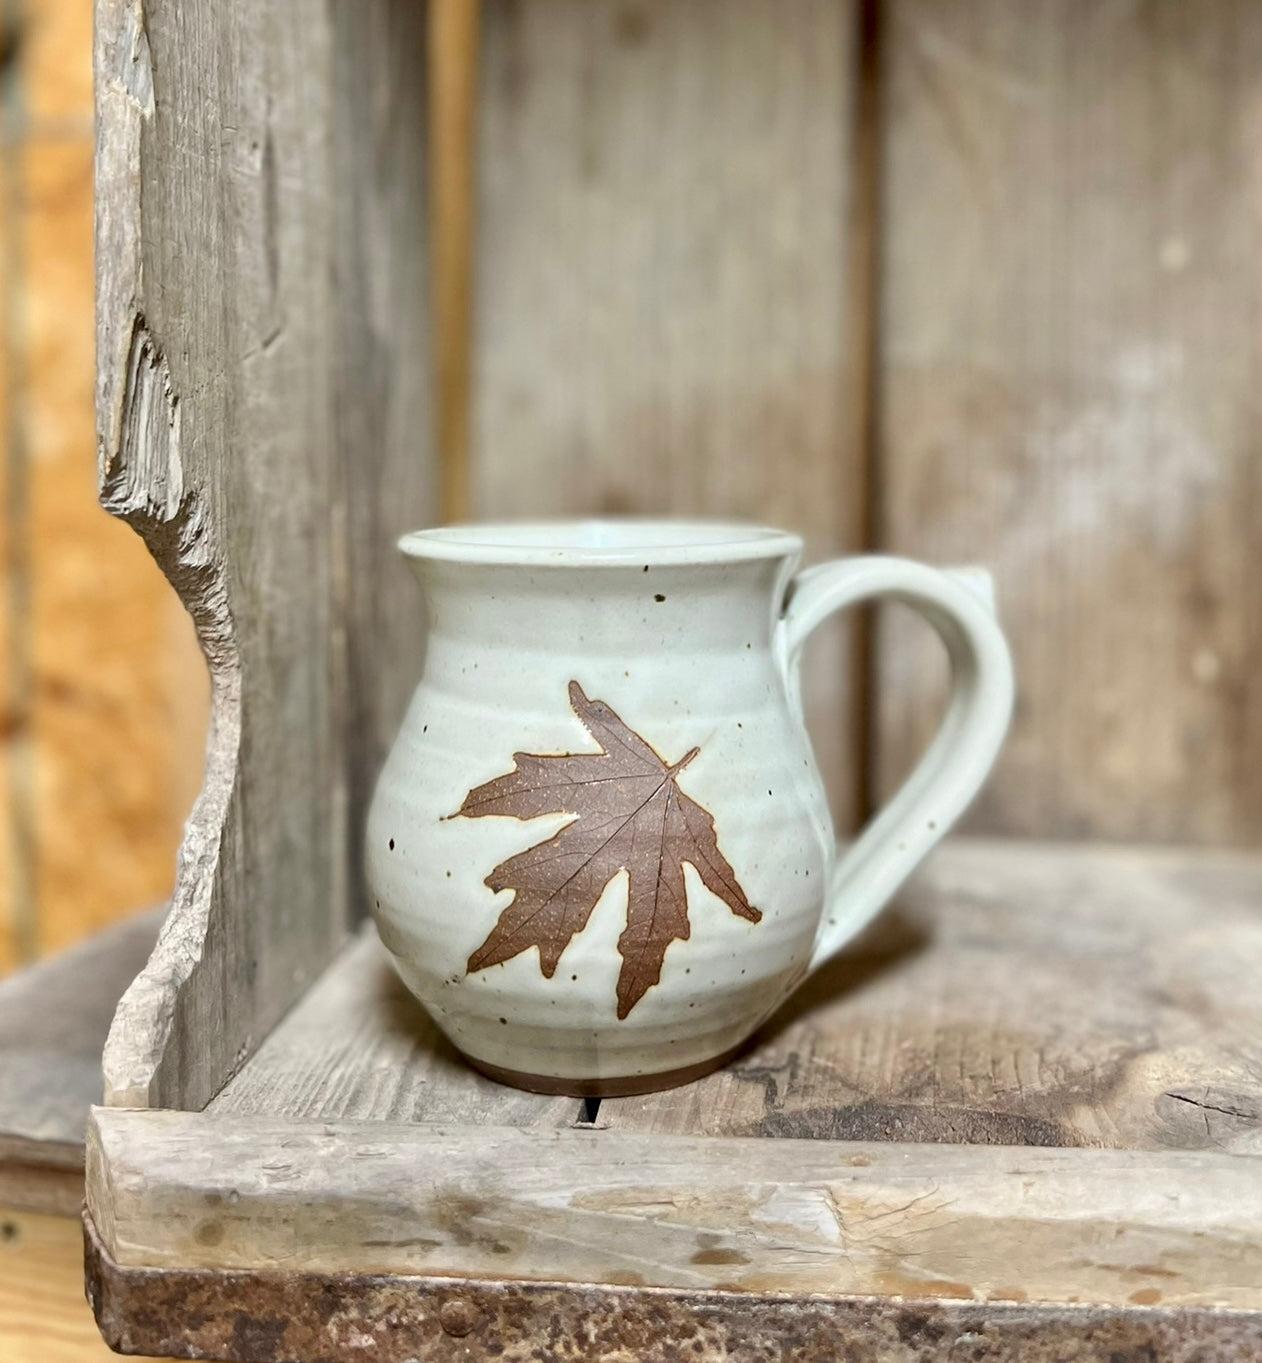 Alewine Pottery - Take 10% off Mama Bear and Papa Bear mugs with the code  mamapapa10 online only at Alewinepottery.net. • • • • #genuinealewine  #maker #artisan #handmade #craftsman #functionalpottery #pottery #clay #